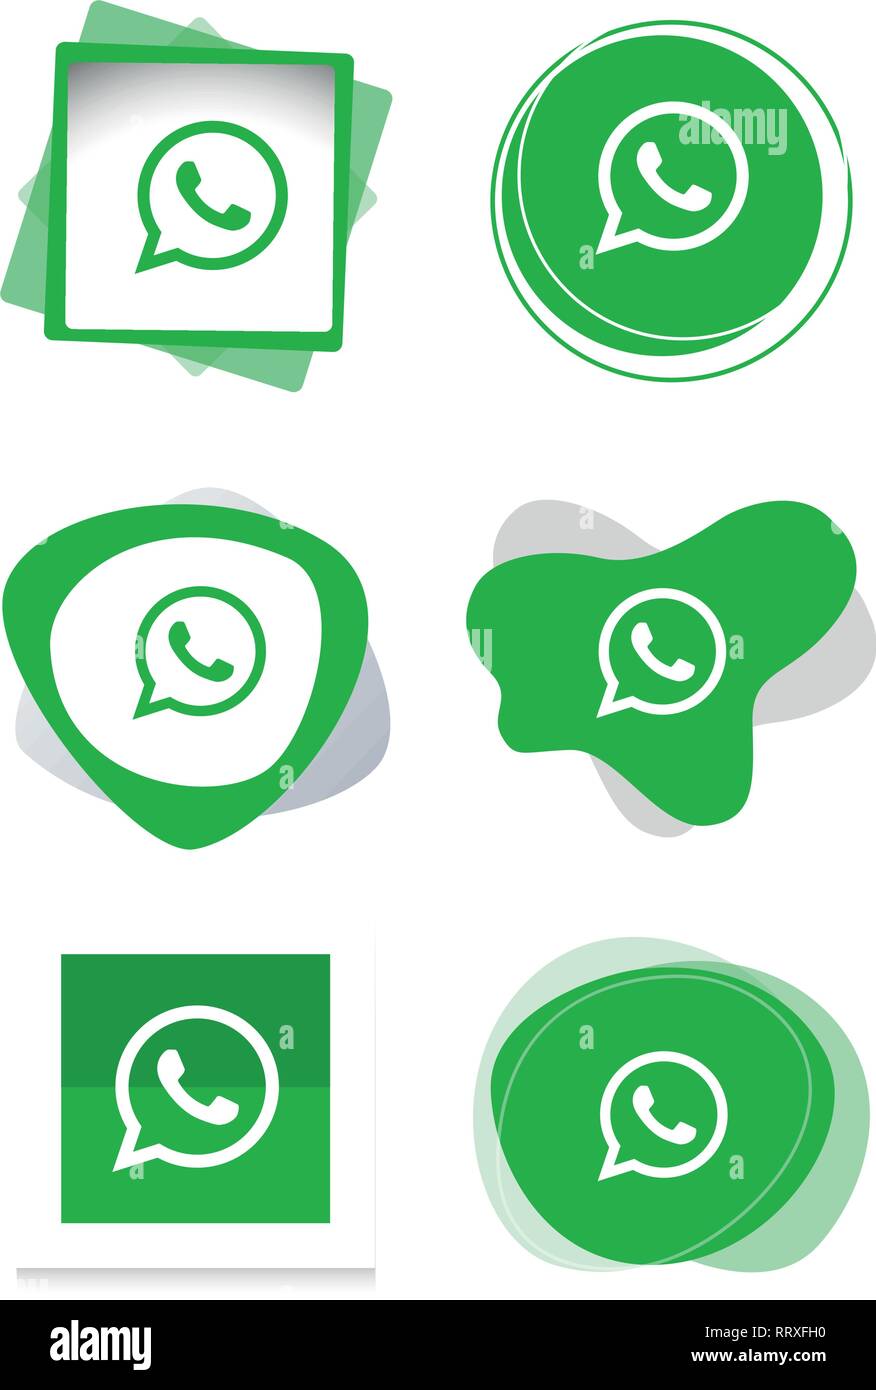 Vetor Whatsapp Icone free for commercial use high quality images